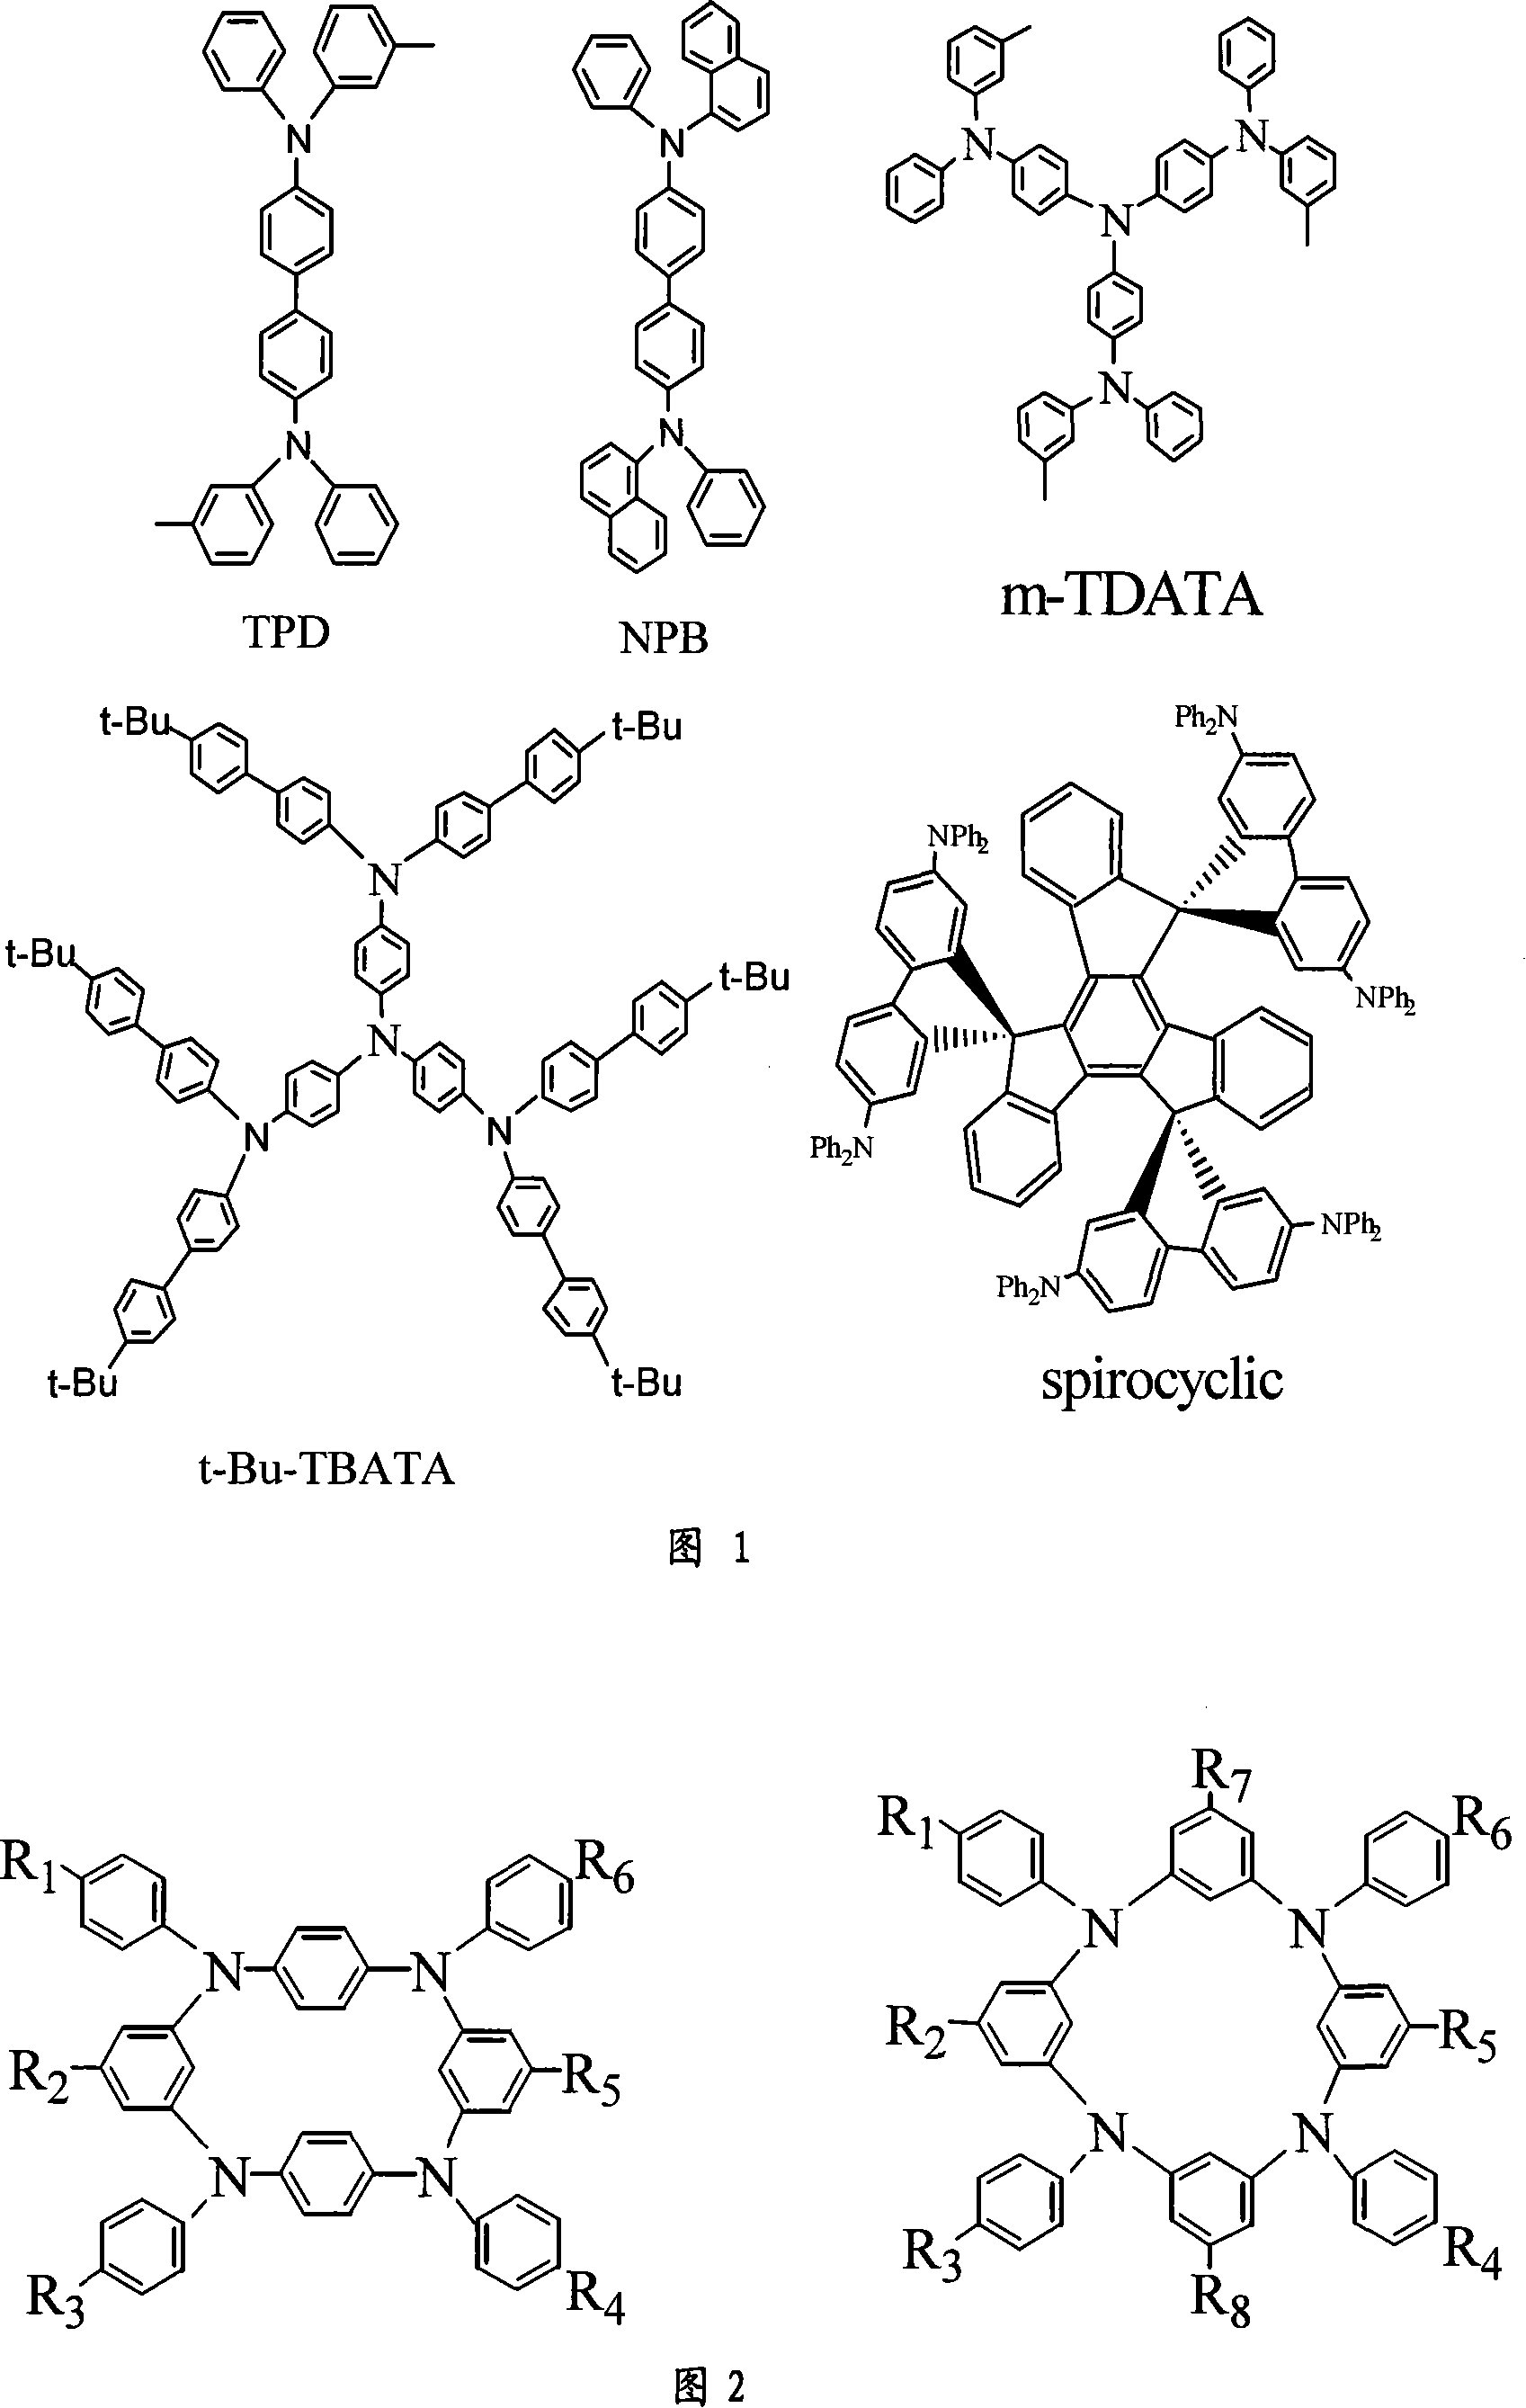 Cyclic arylamine as hole transferring material with high vitrification point and its synthesis process